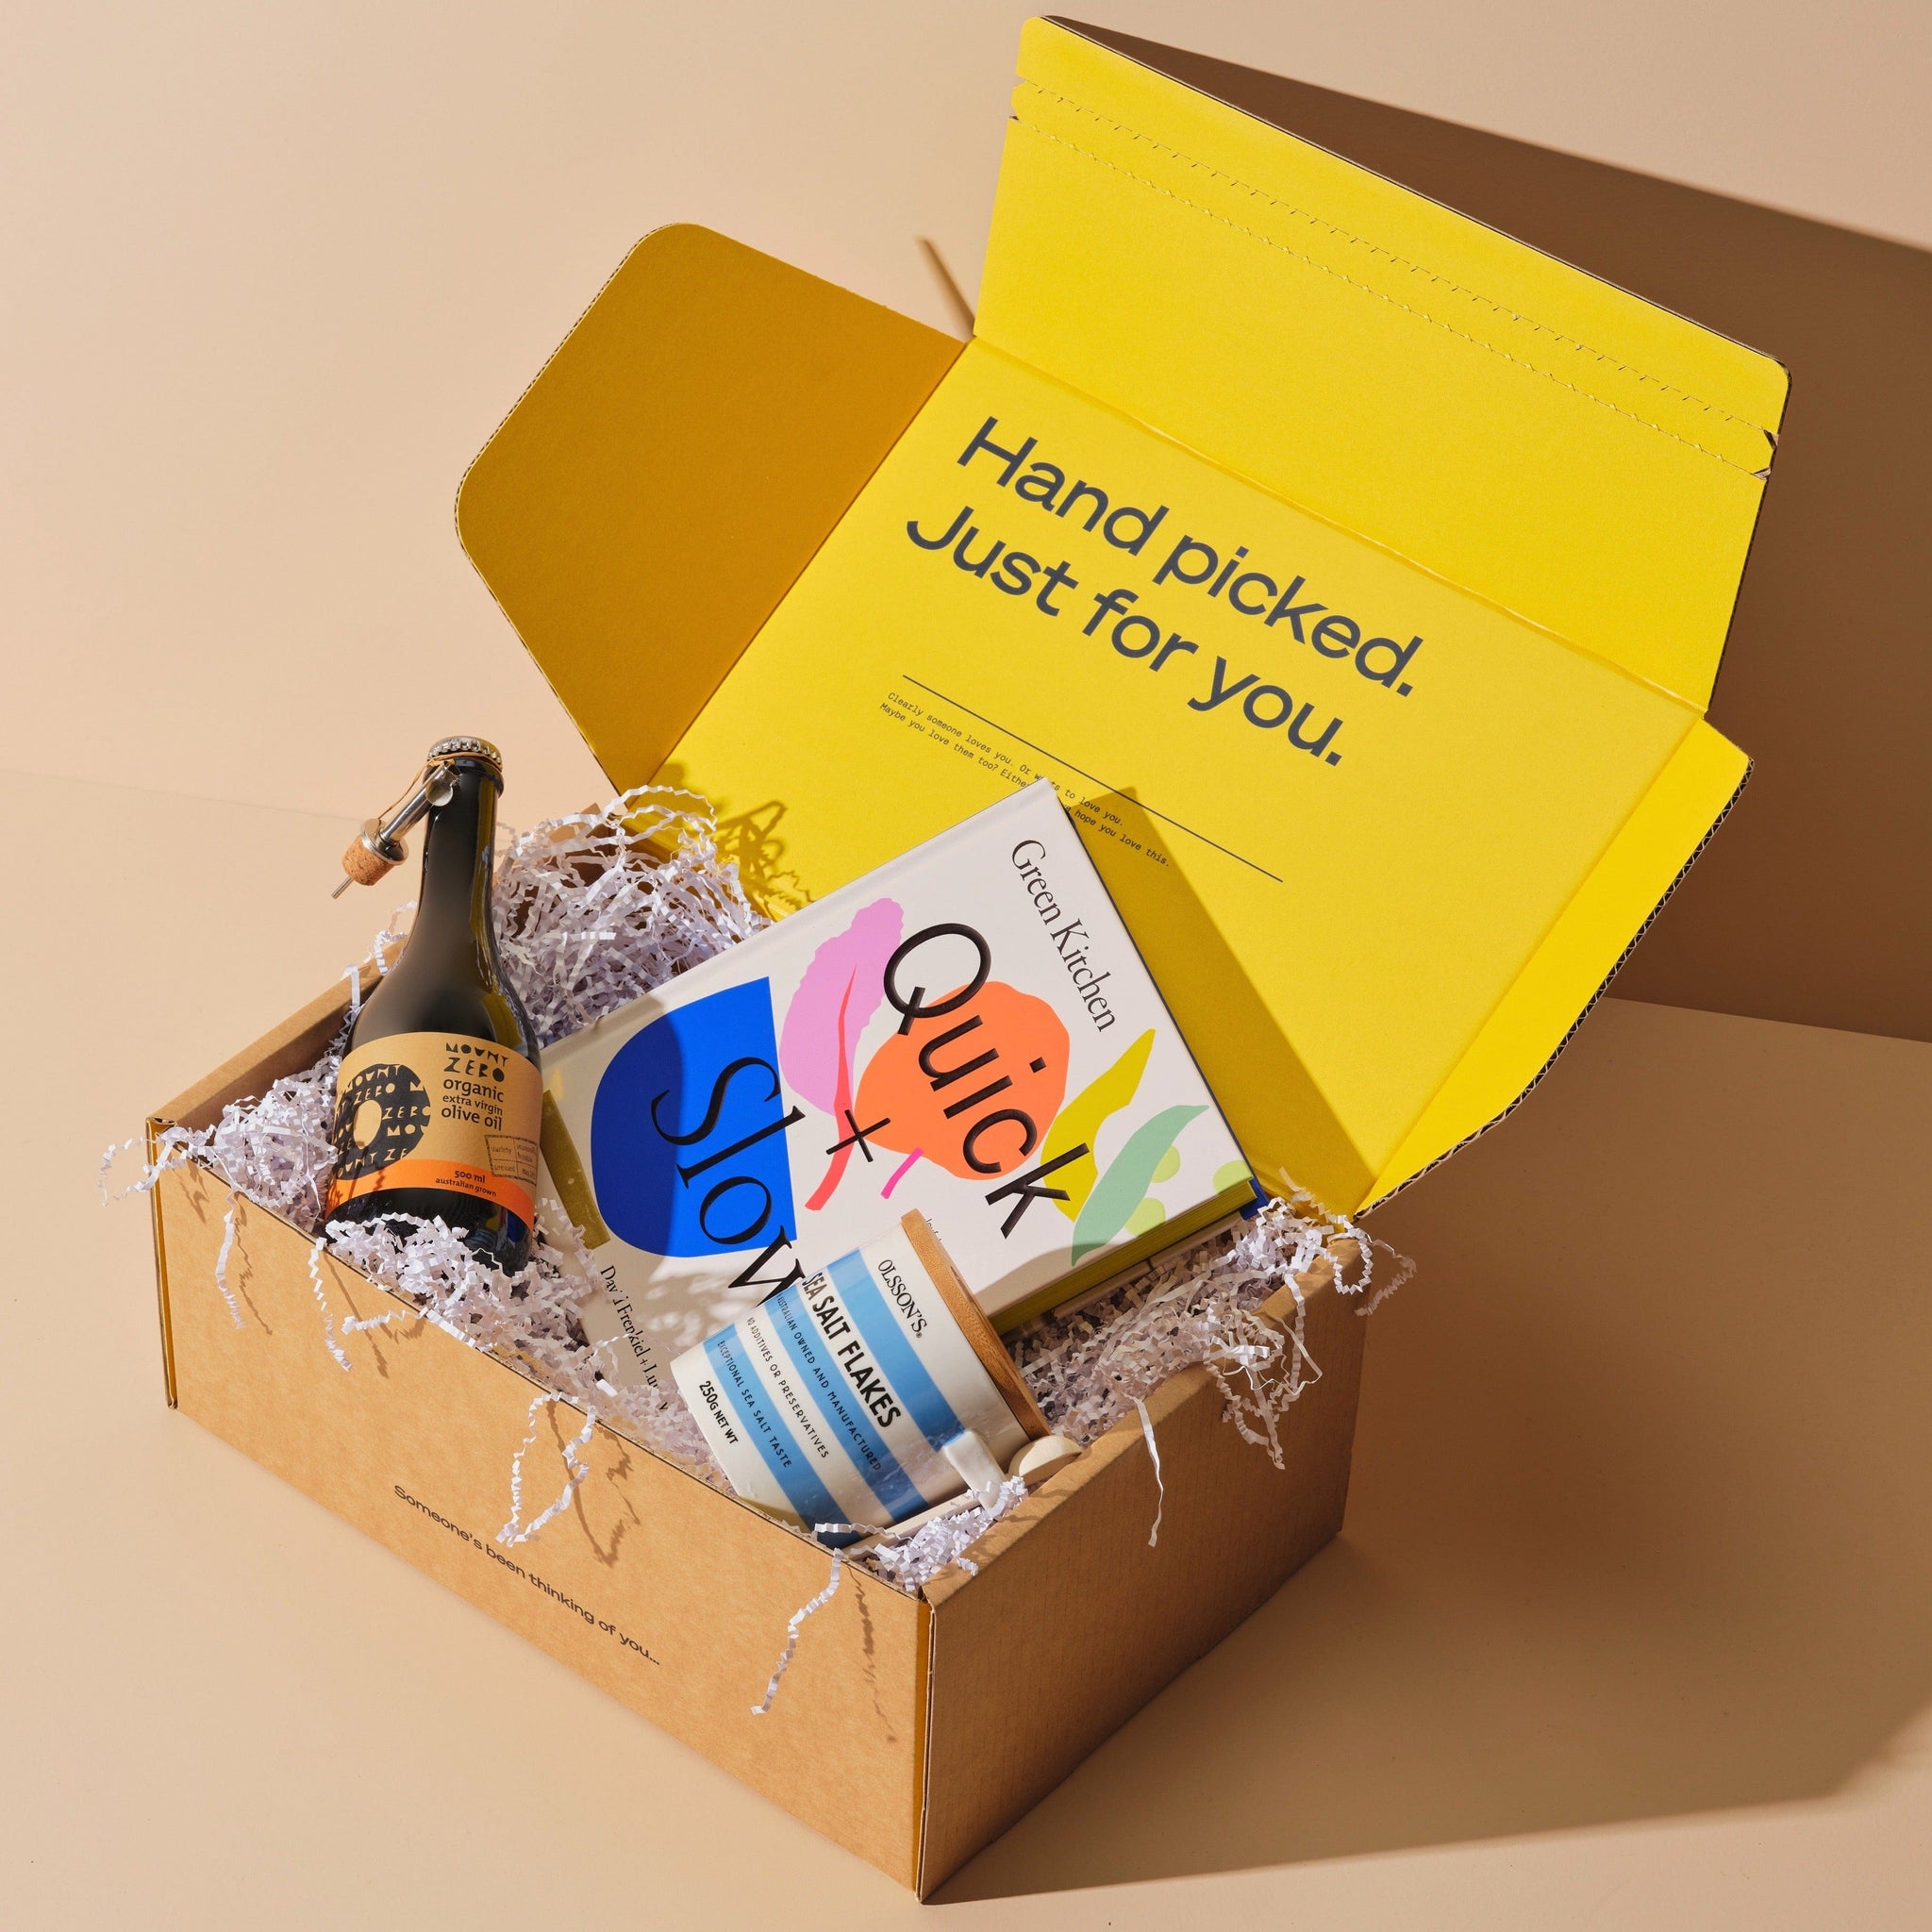 Handsel's gift bundle 'Veg Out', displayed in the packaging